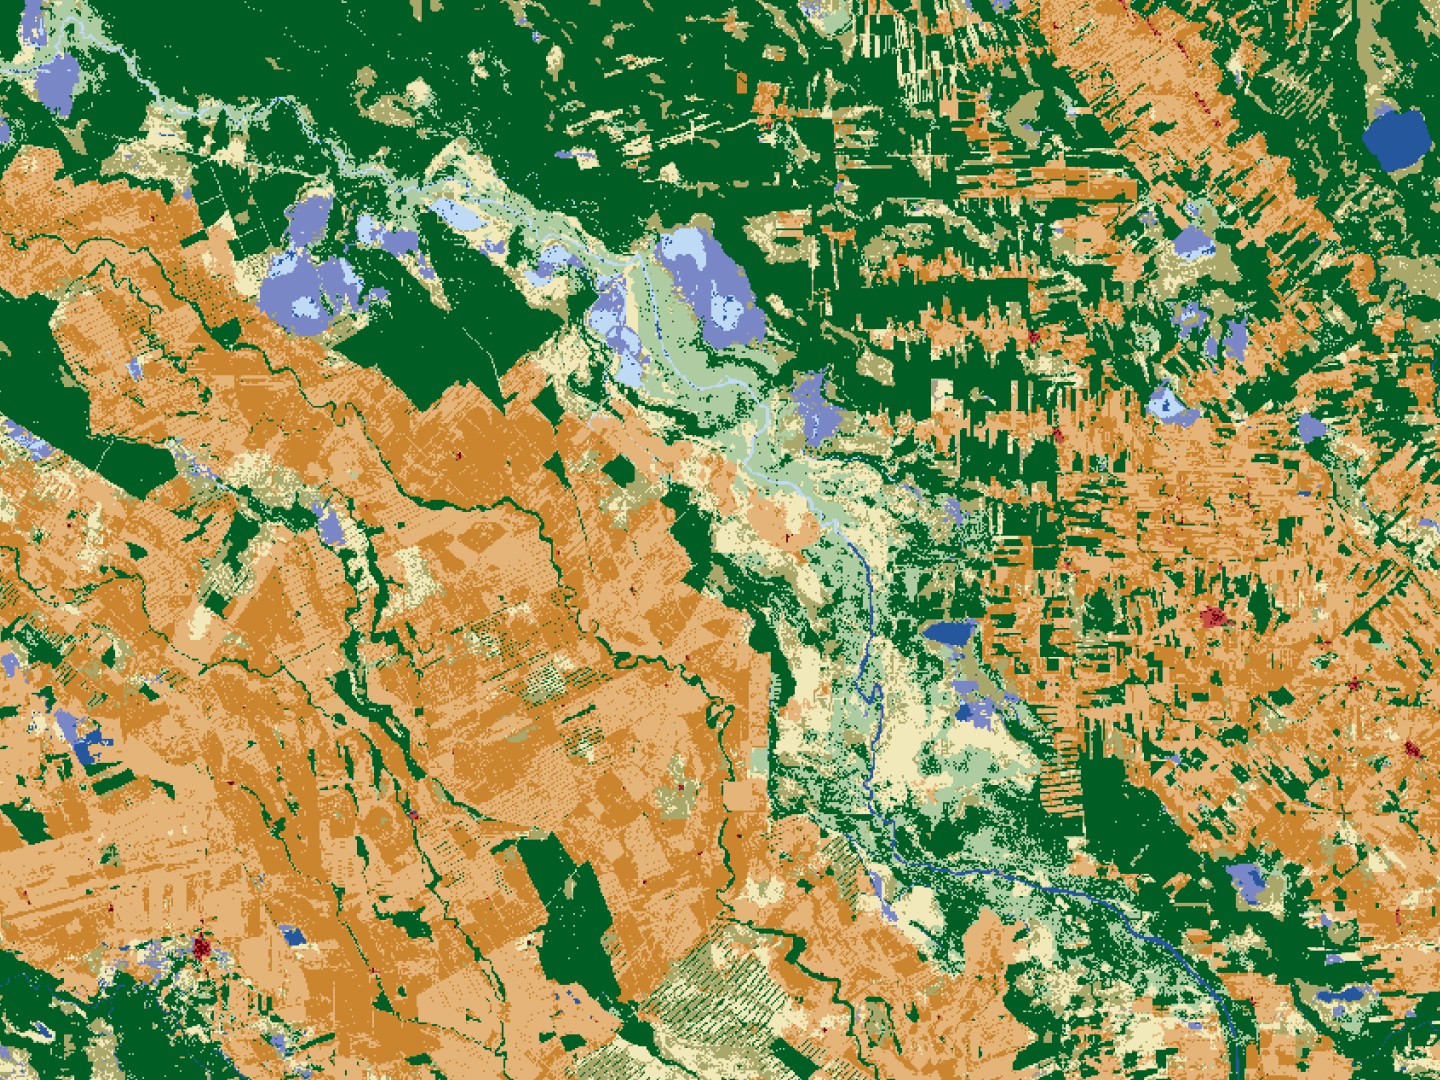 example of food and farming through the use of IOs land use land cover map